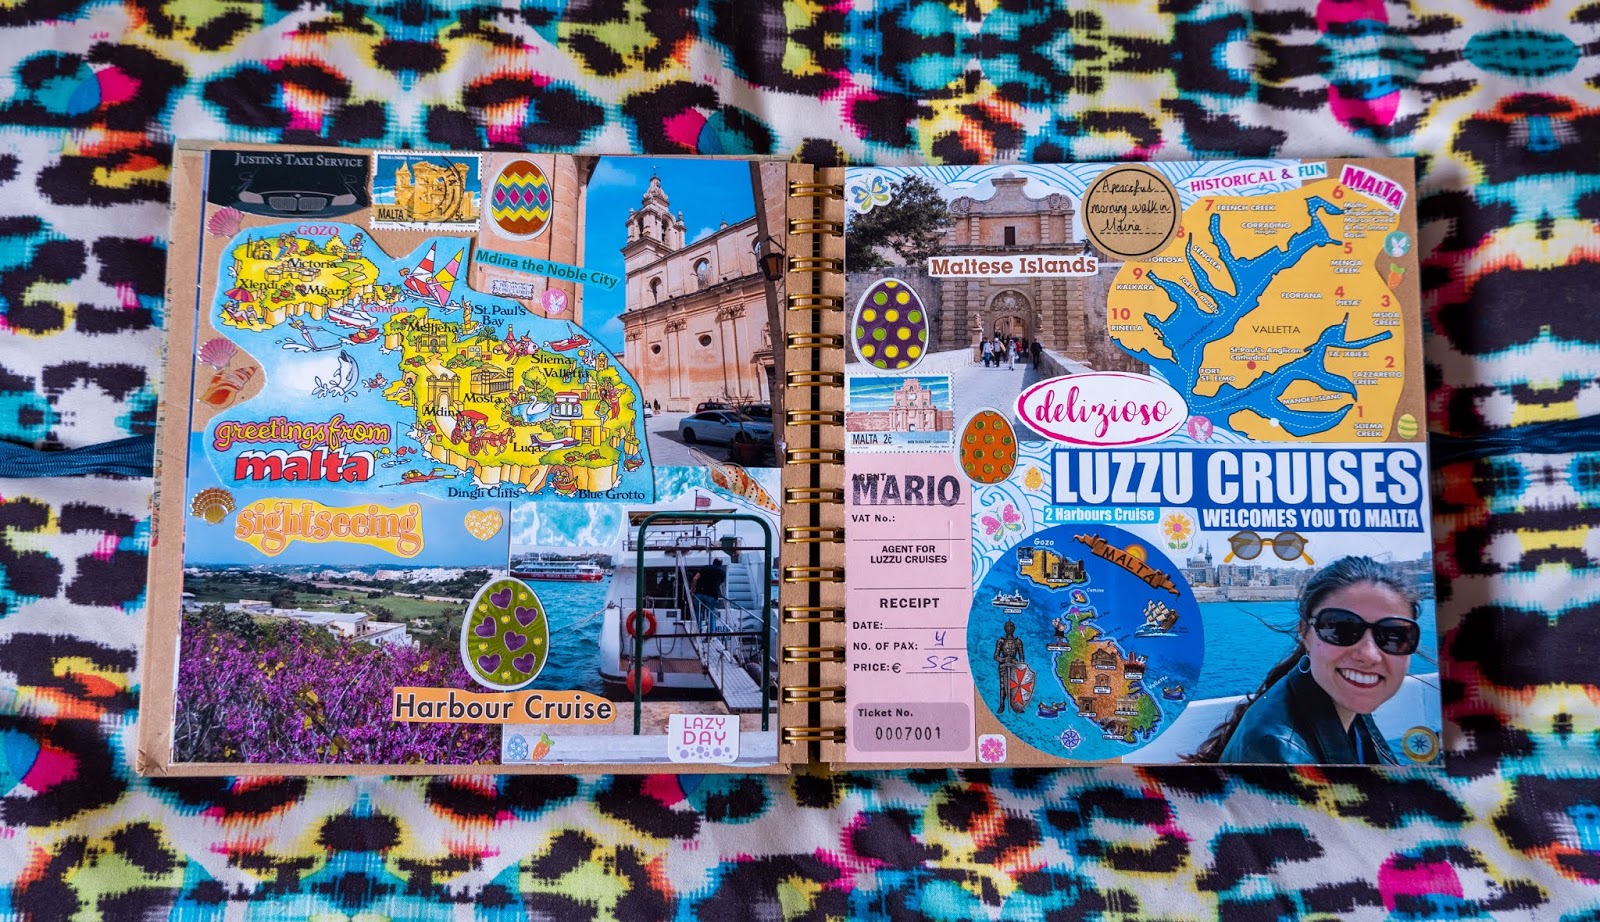 Malta pages in my 2019 travel scrapbooks